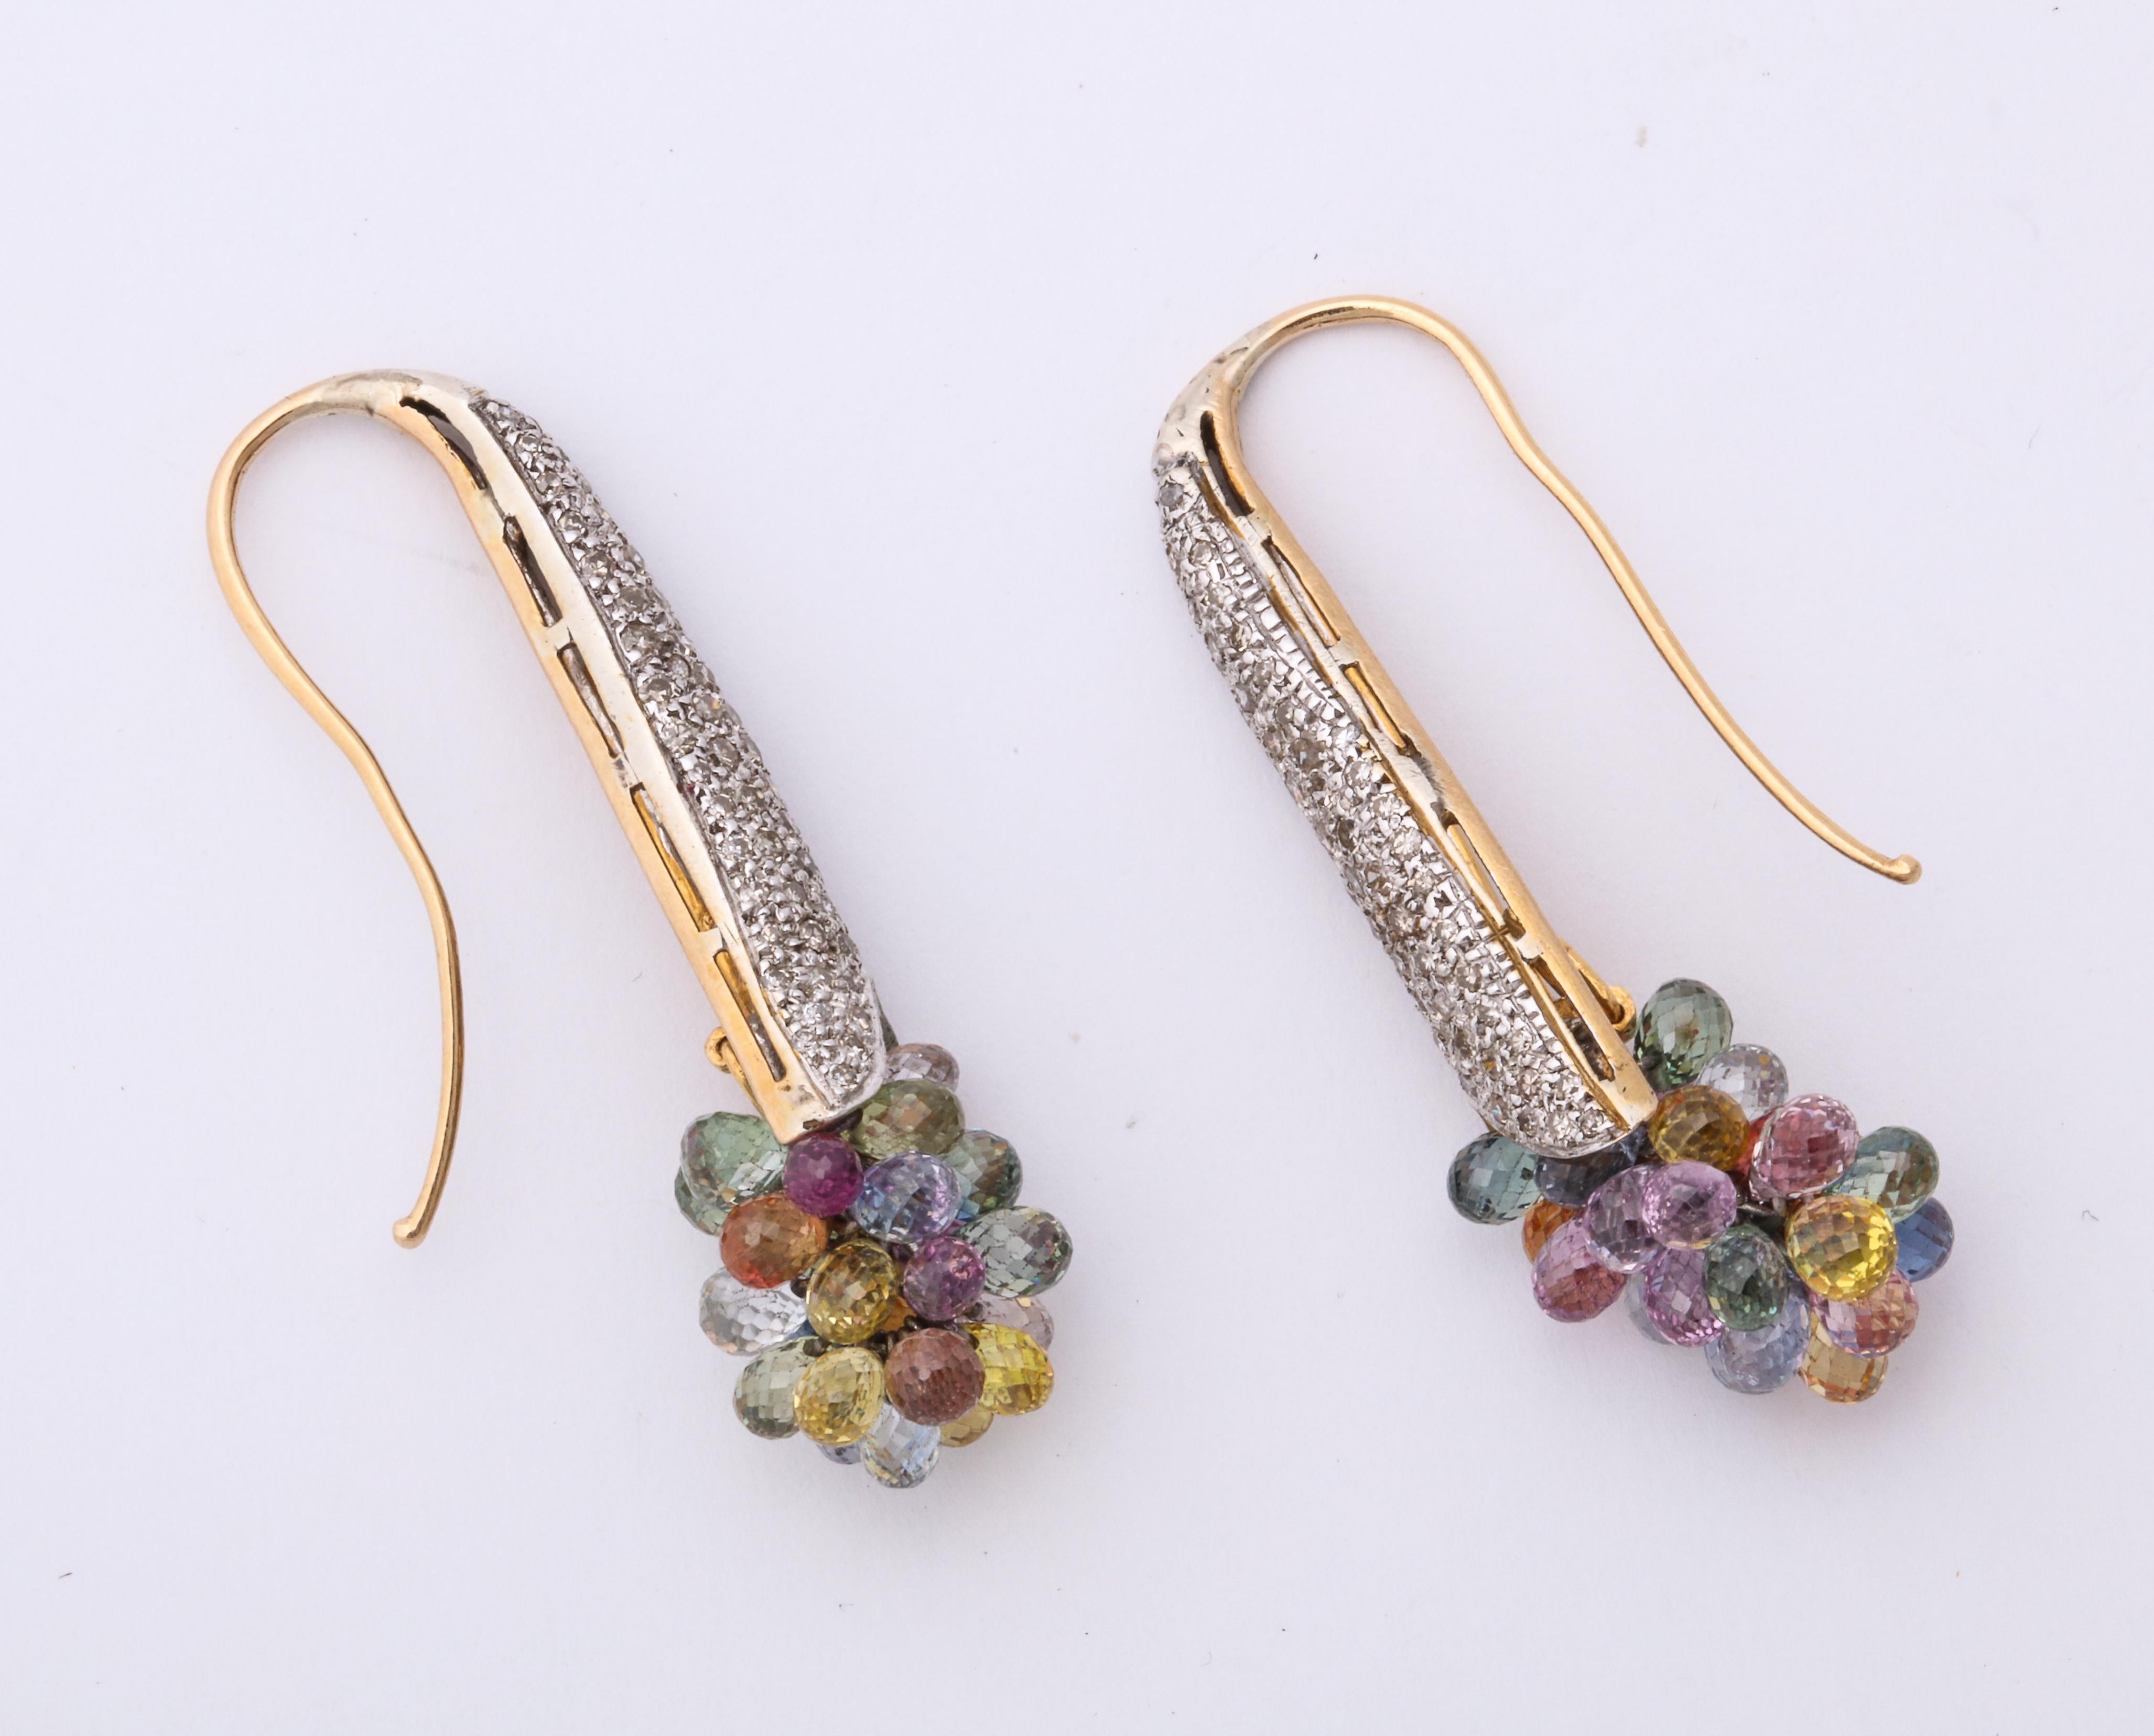 A charming pair of platinum and gold earrings with a  cluster of faceted dangling gemstones at the bottom. These are amazing earrings and can be worn with pleasure.